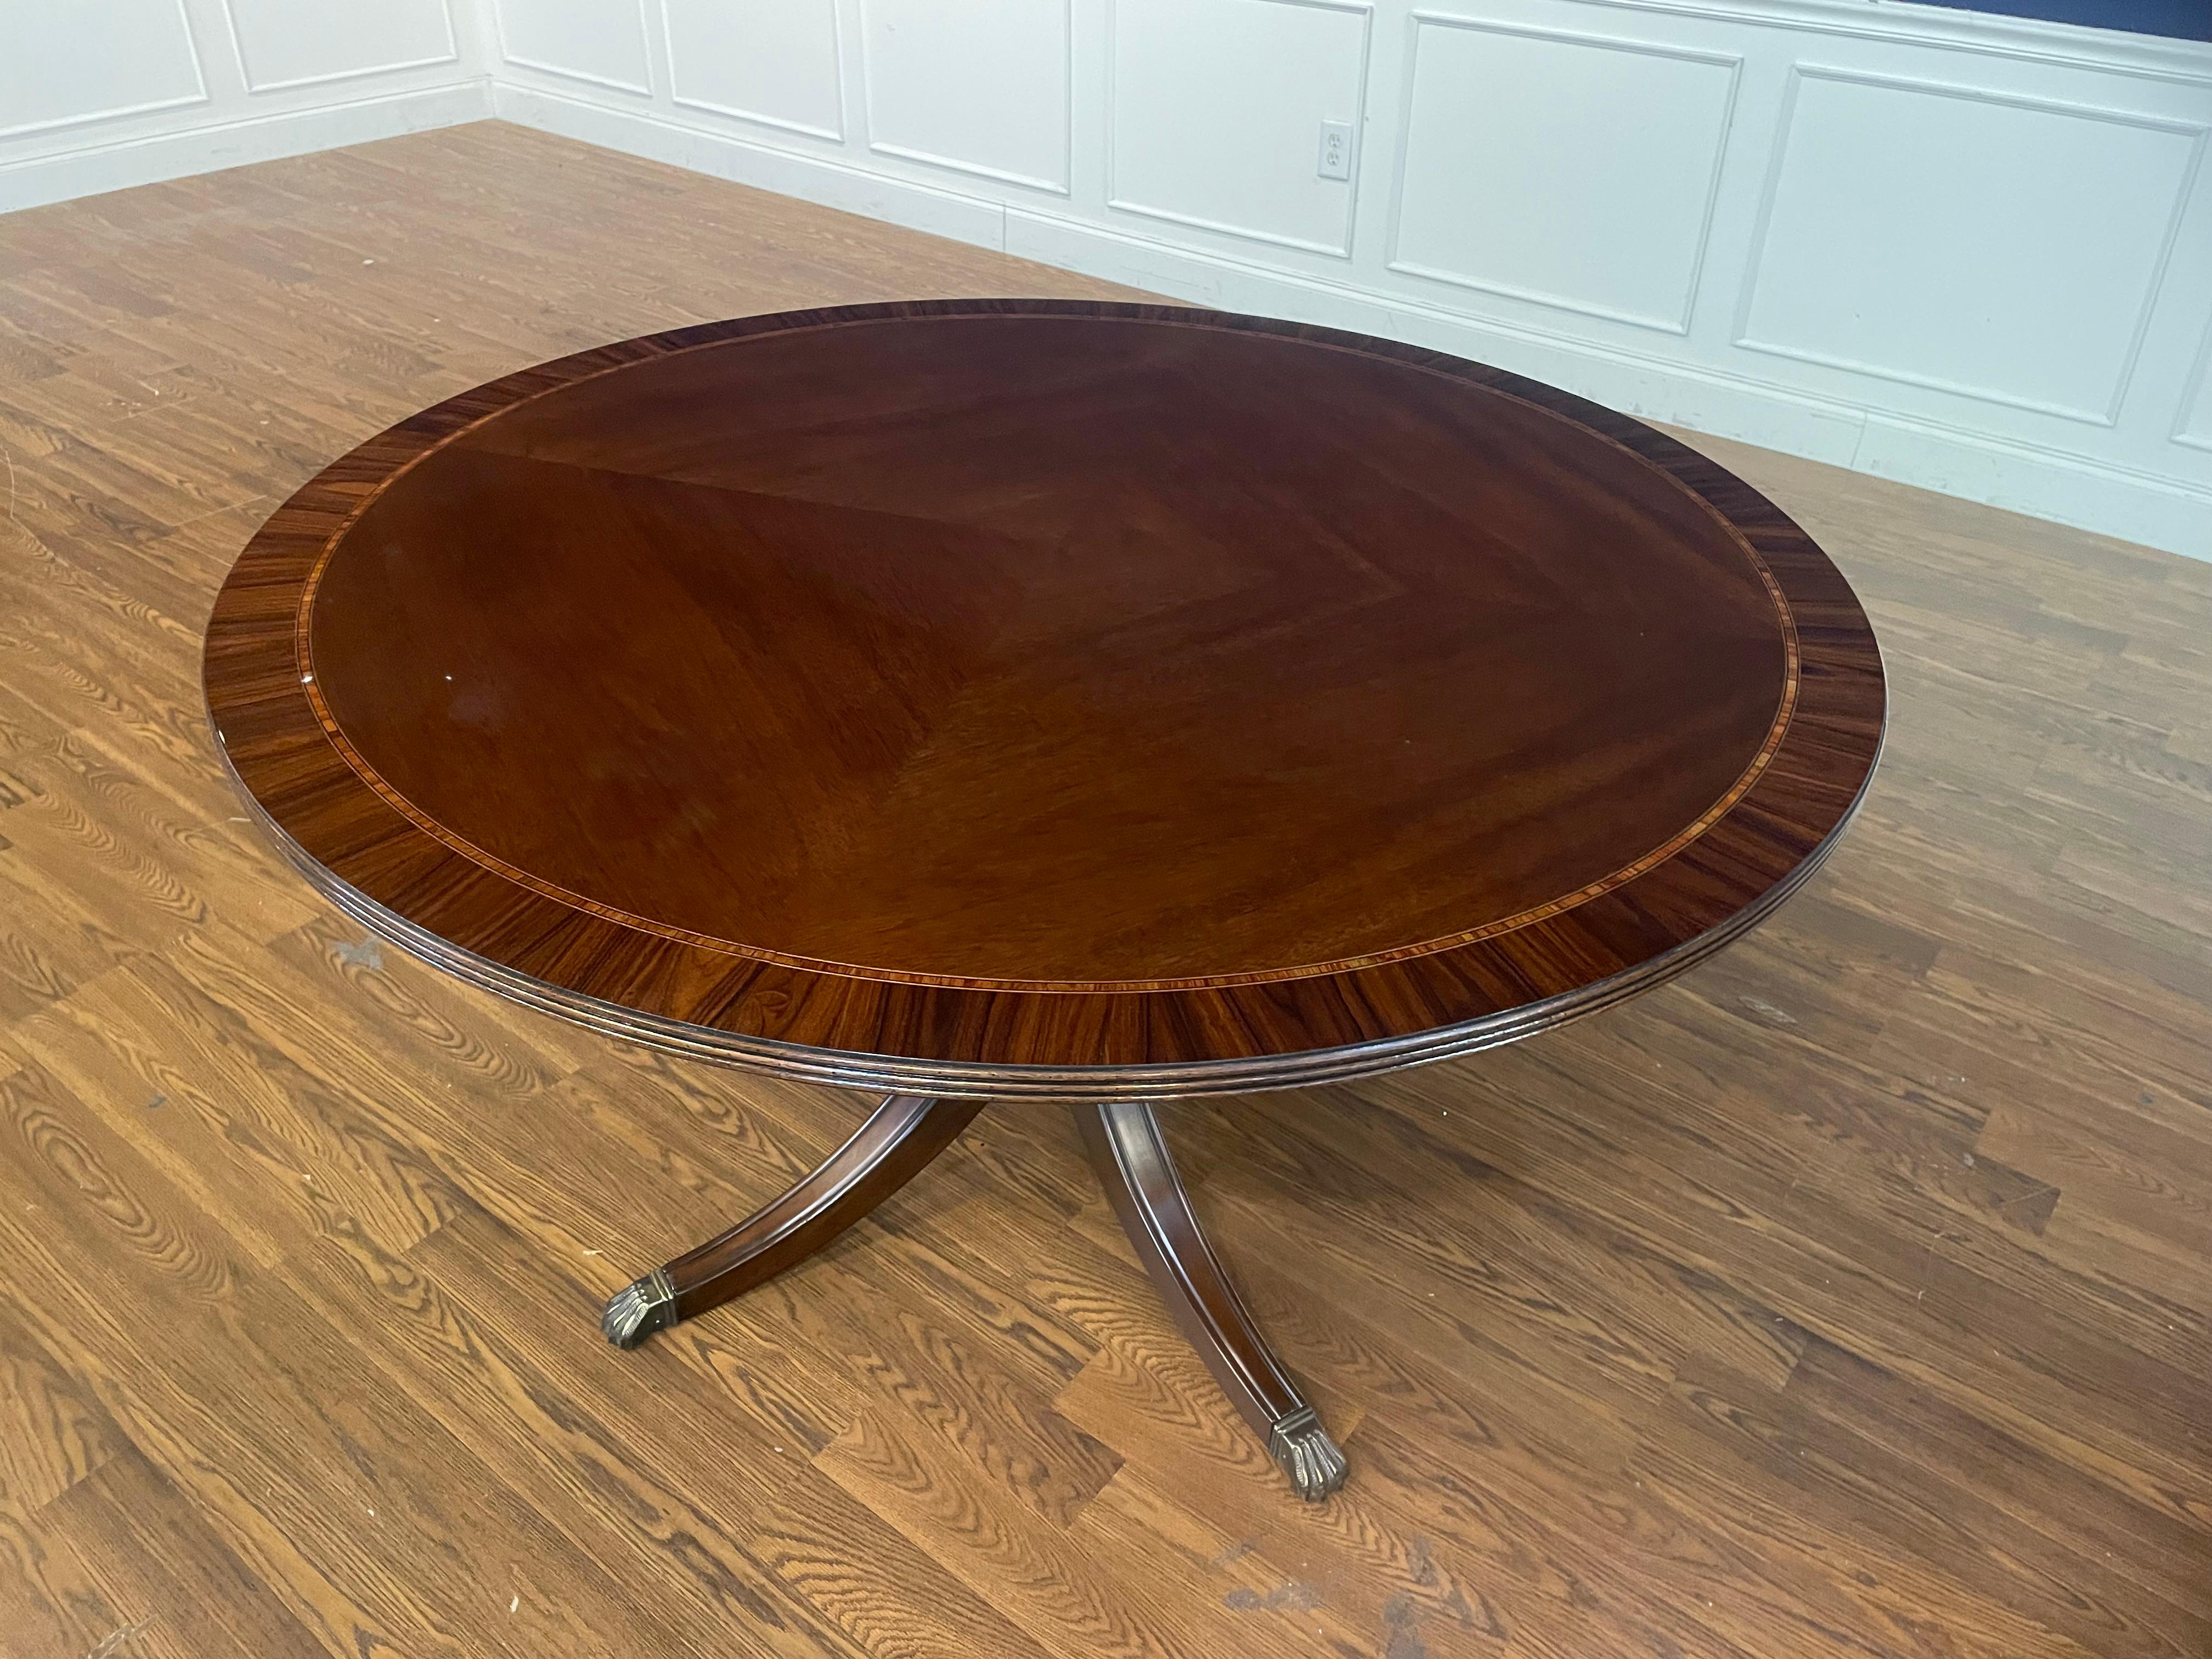 Contemporary 54 Inch Round Mahogany Dining Table by Leighton Hall - Showroom Sample For Sale